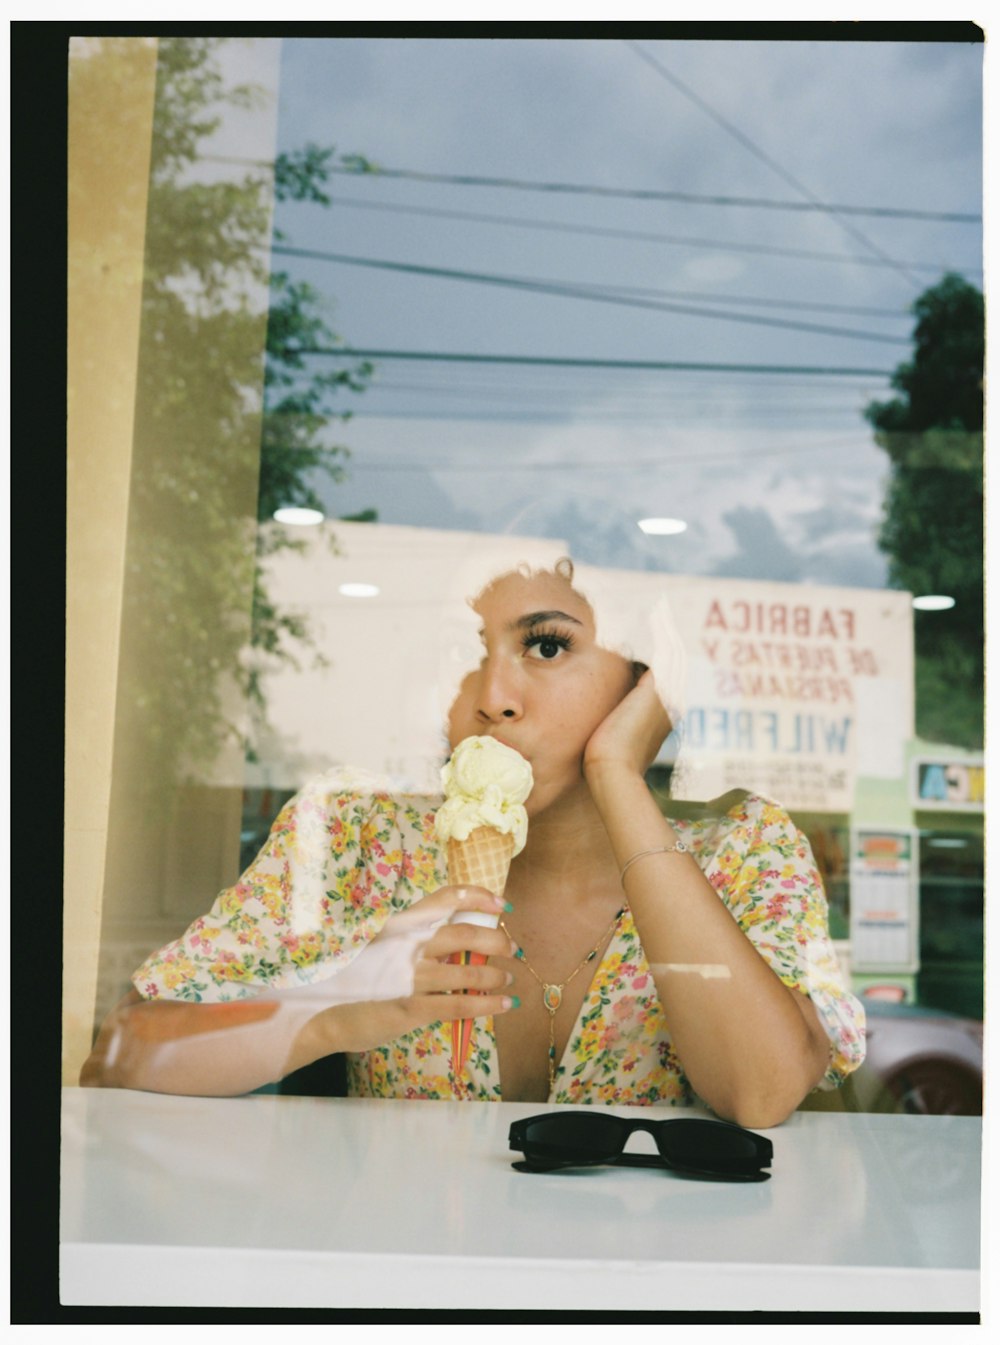 a woman sitting at a table eating an ice cream cone